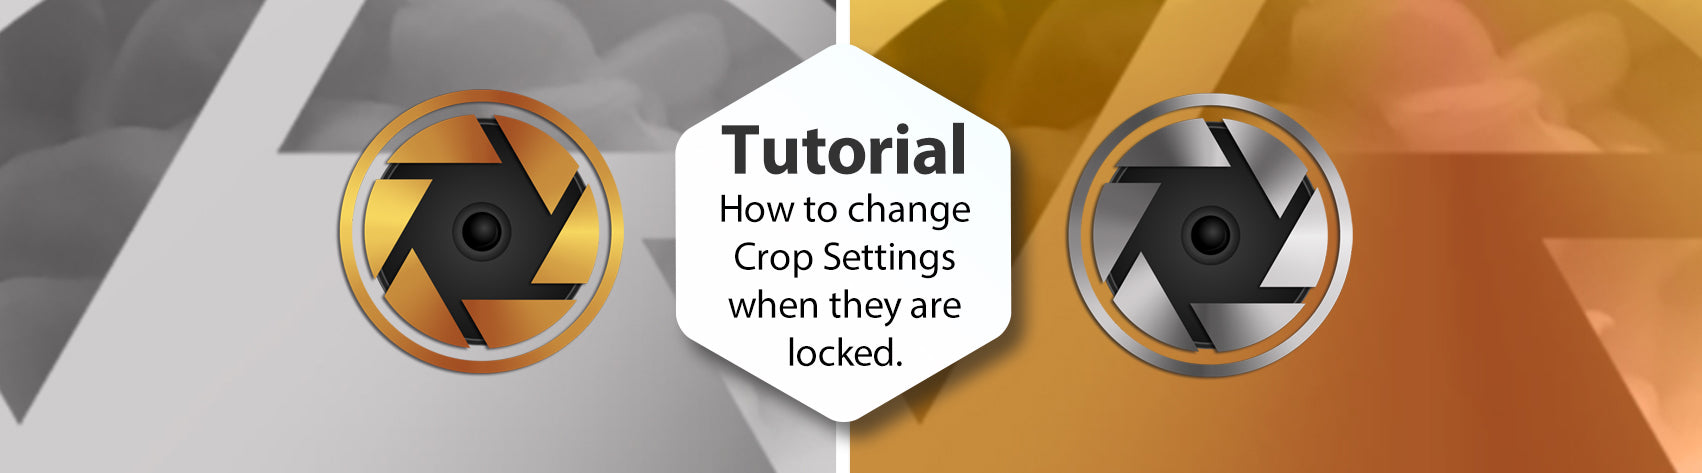 Tutorial - How to change Crop Settings when they are locked